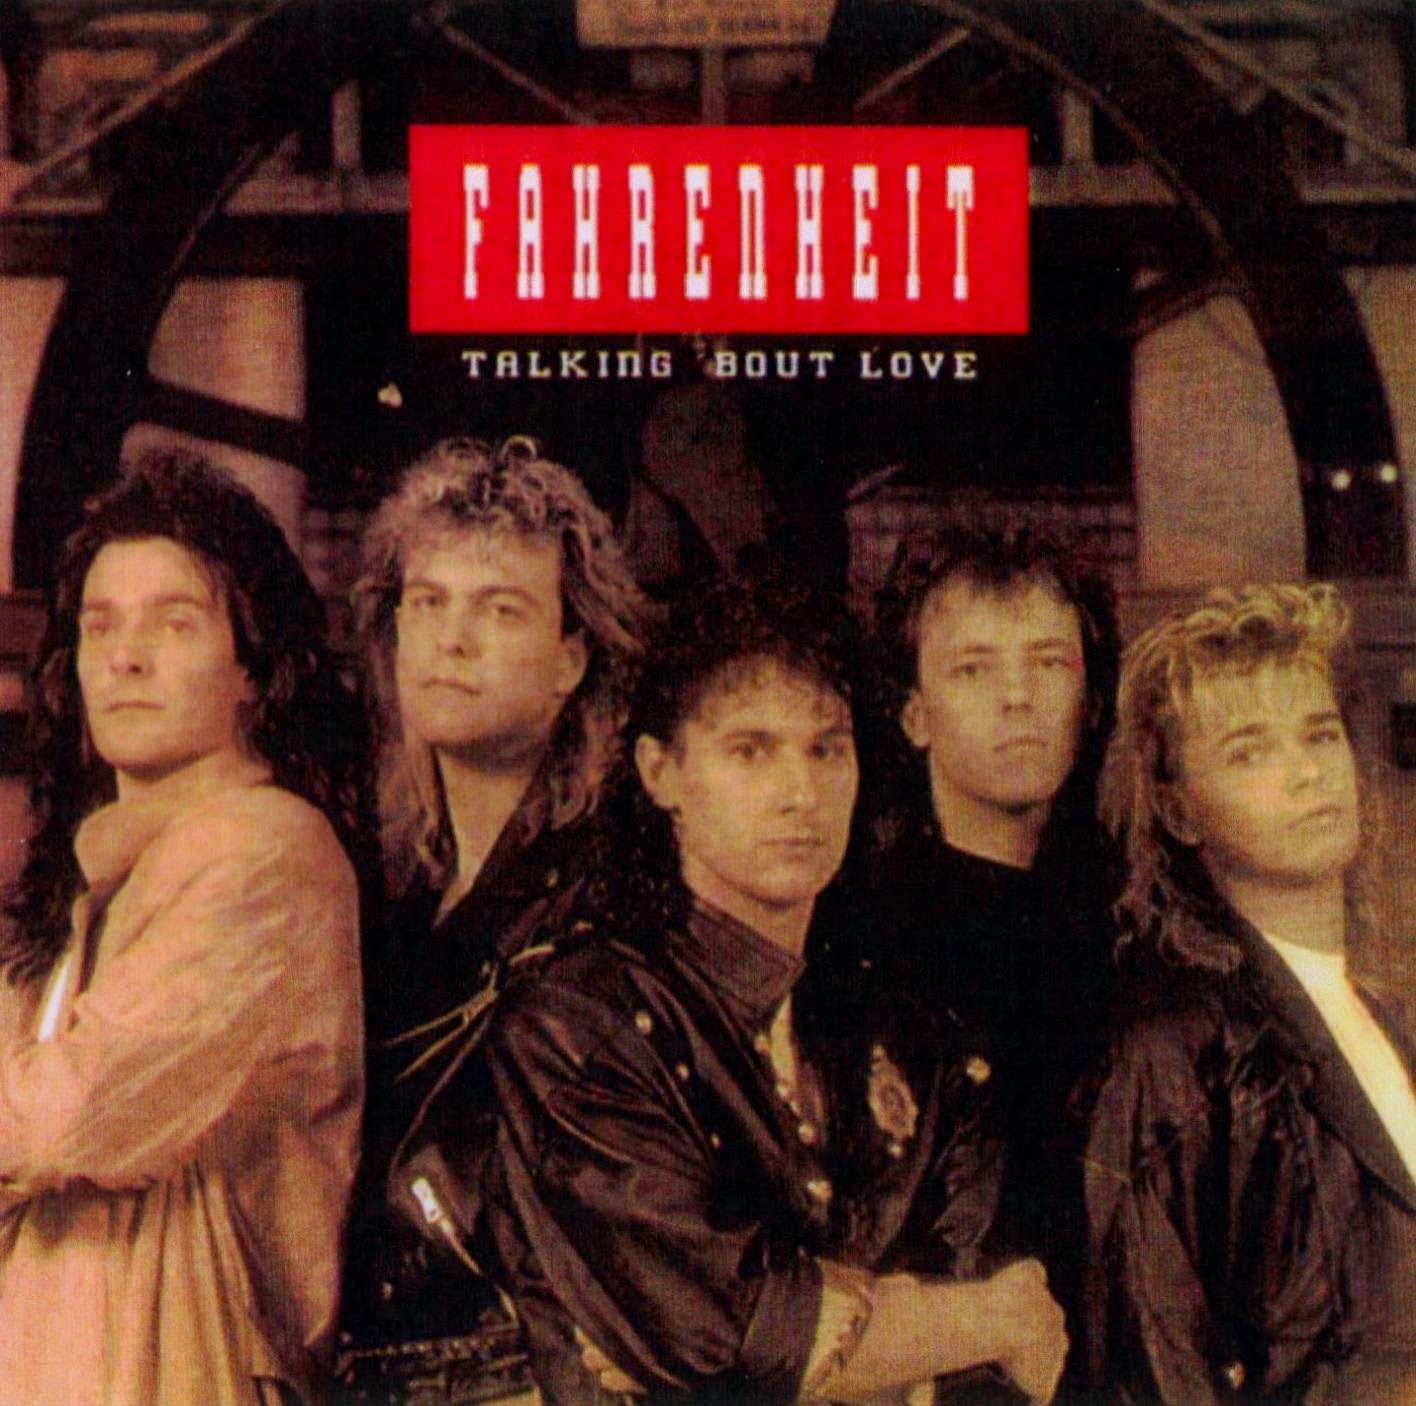 Fahrenheit Talking about love 1989 aor melodic rock music blogspot albums bands